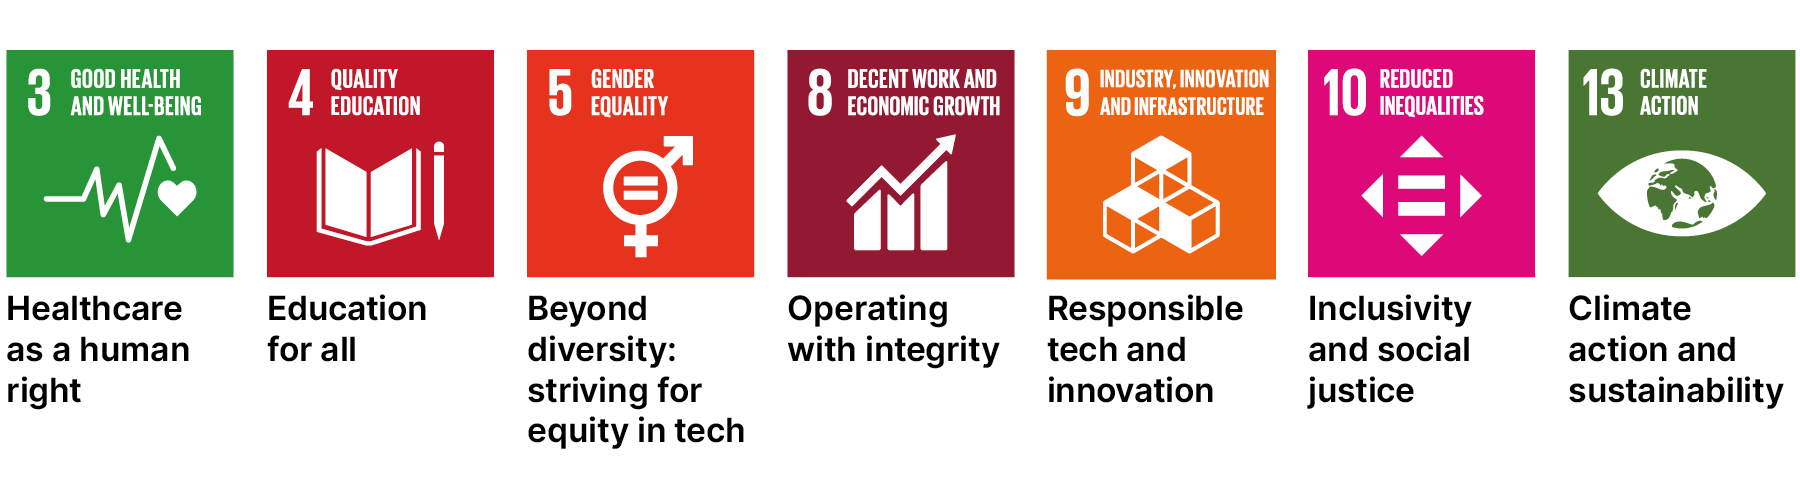 Thoughtworks supports specific SDGs:  (3) Healthcare as a human right, (4) Education, (5) Beyond diversity, (8) Operating with integrity, (9) Responsible tech, (10) Inclusivity and social justice, (13) sustainability and climate action